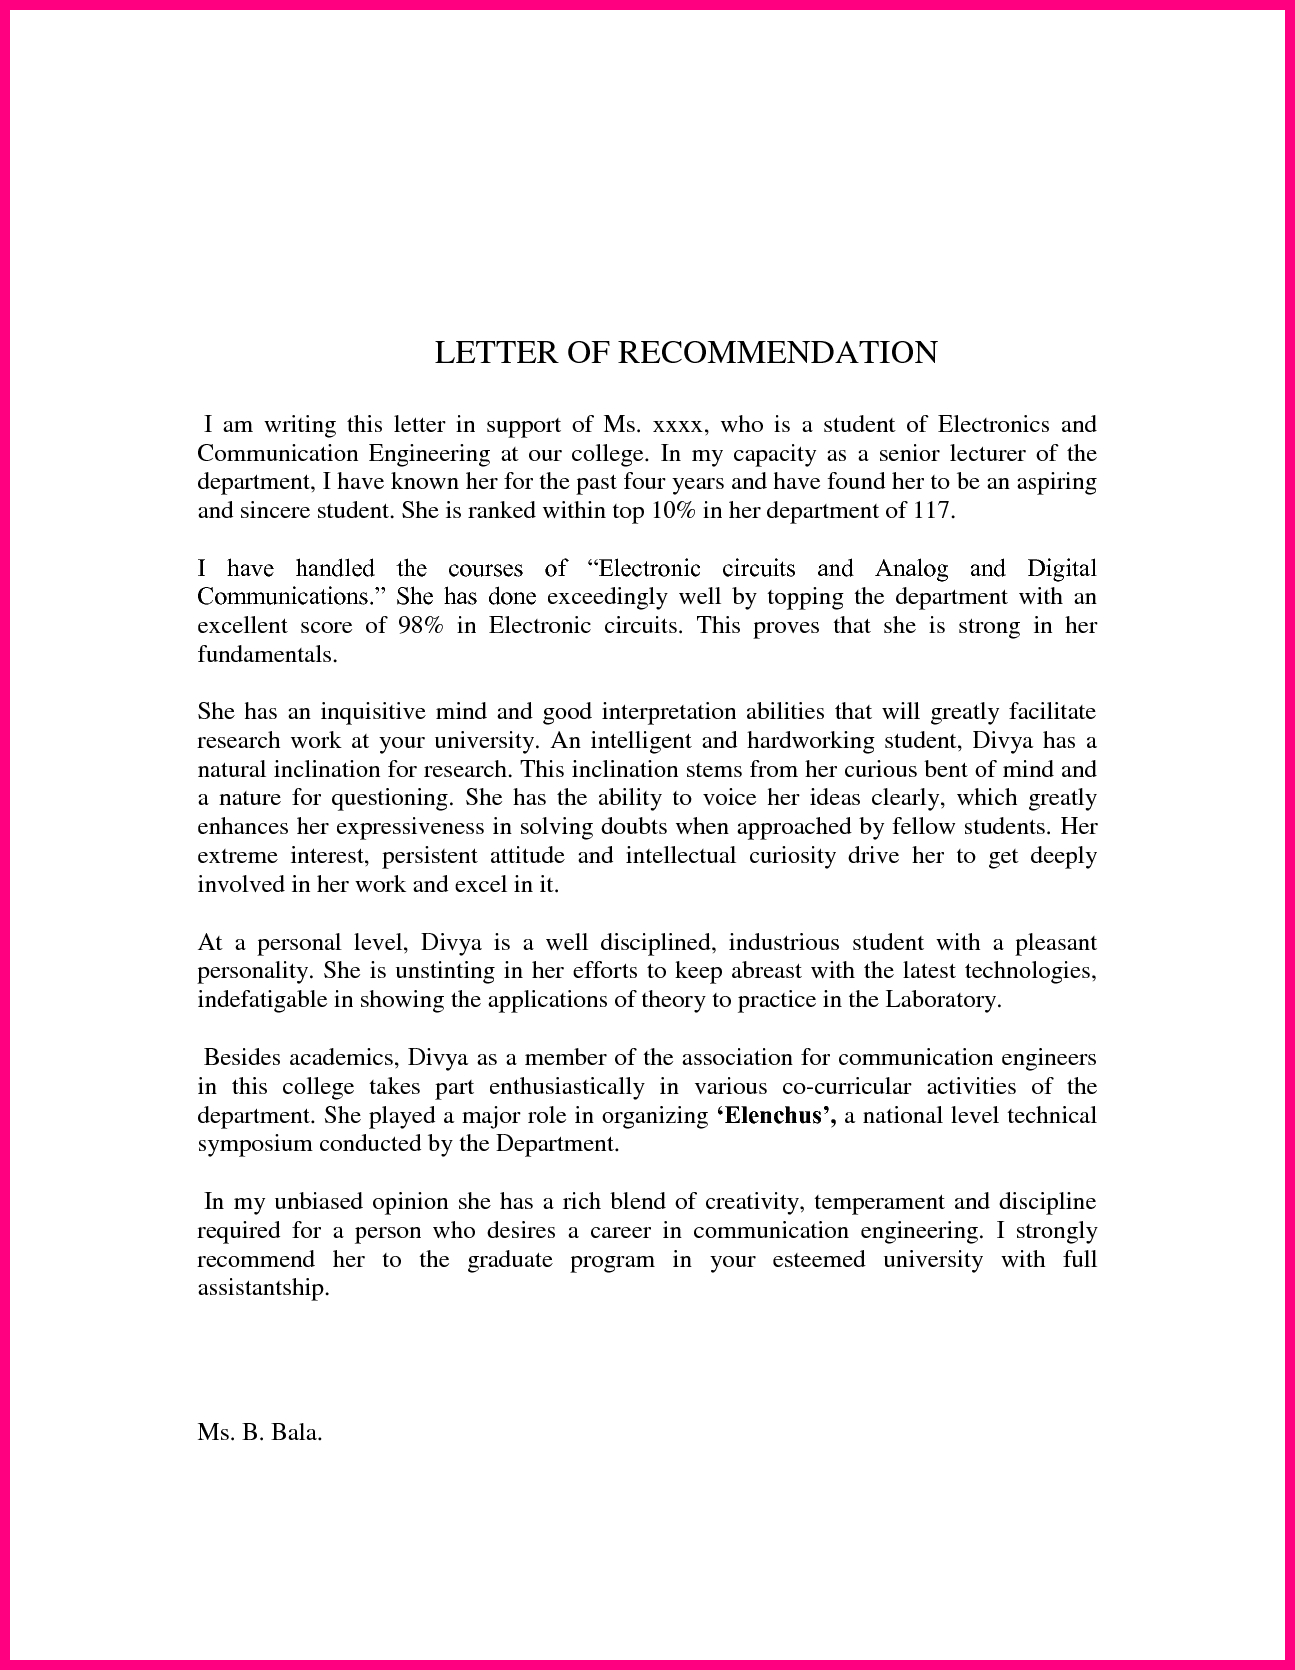 Pt School Letter Of Recommendation Debandje intended for dimensions 1295 X 1670